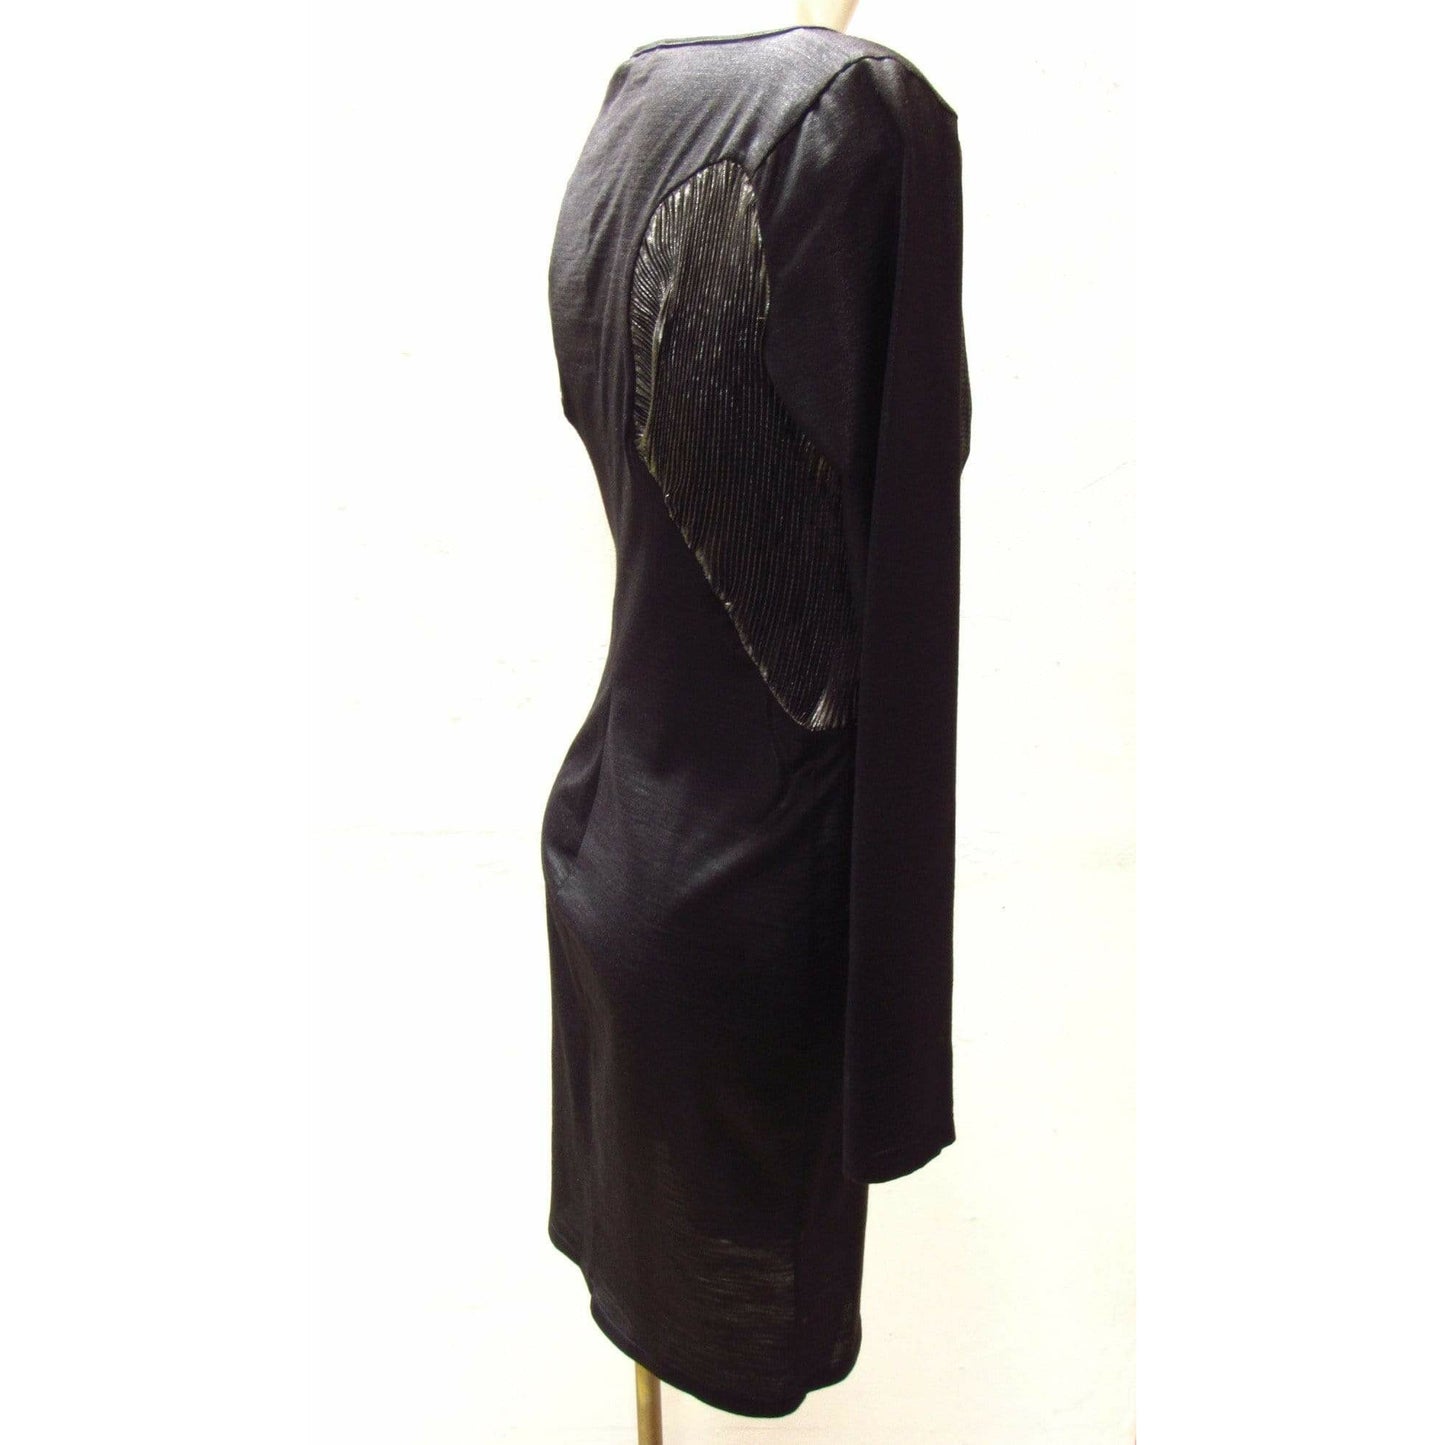 Dresses hussein-chalayan-black-and-silver-dress Black